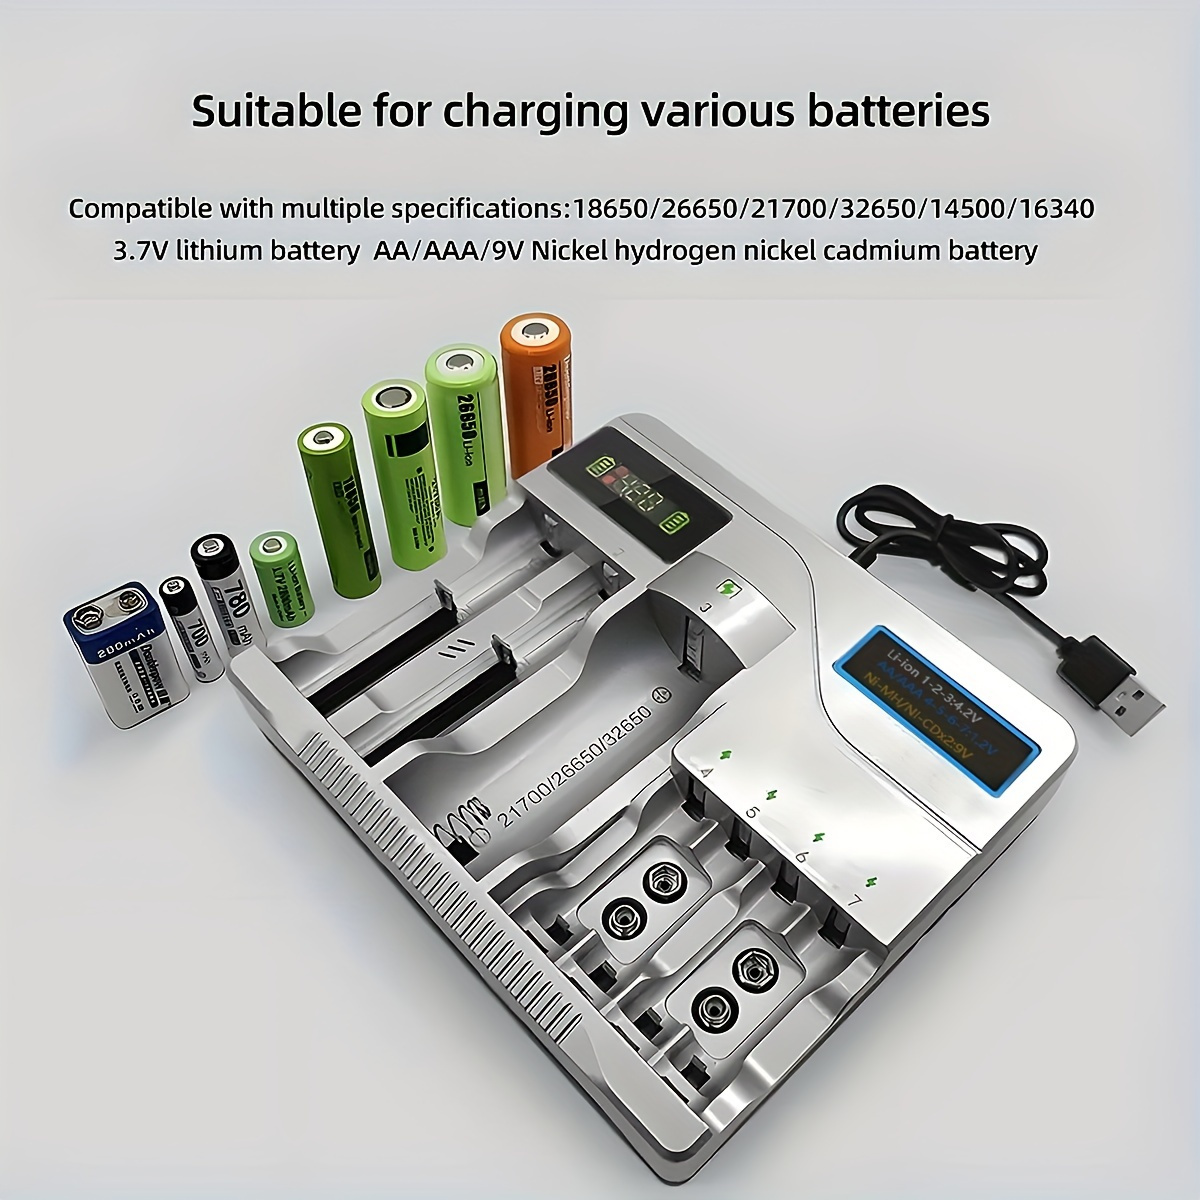 

Universal Smart Battery Charger With Usb Port And Lcd Display - Charges Aa, Aaa, 18650, 16340, 14500, 21700, 26650, 32650, And 9v Rechargeable Batteries - (batteries Not Included)